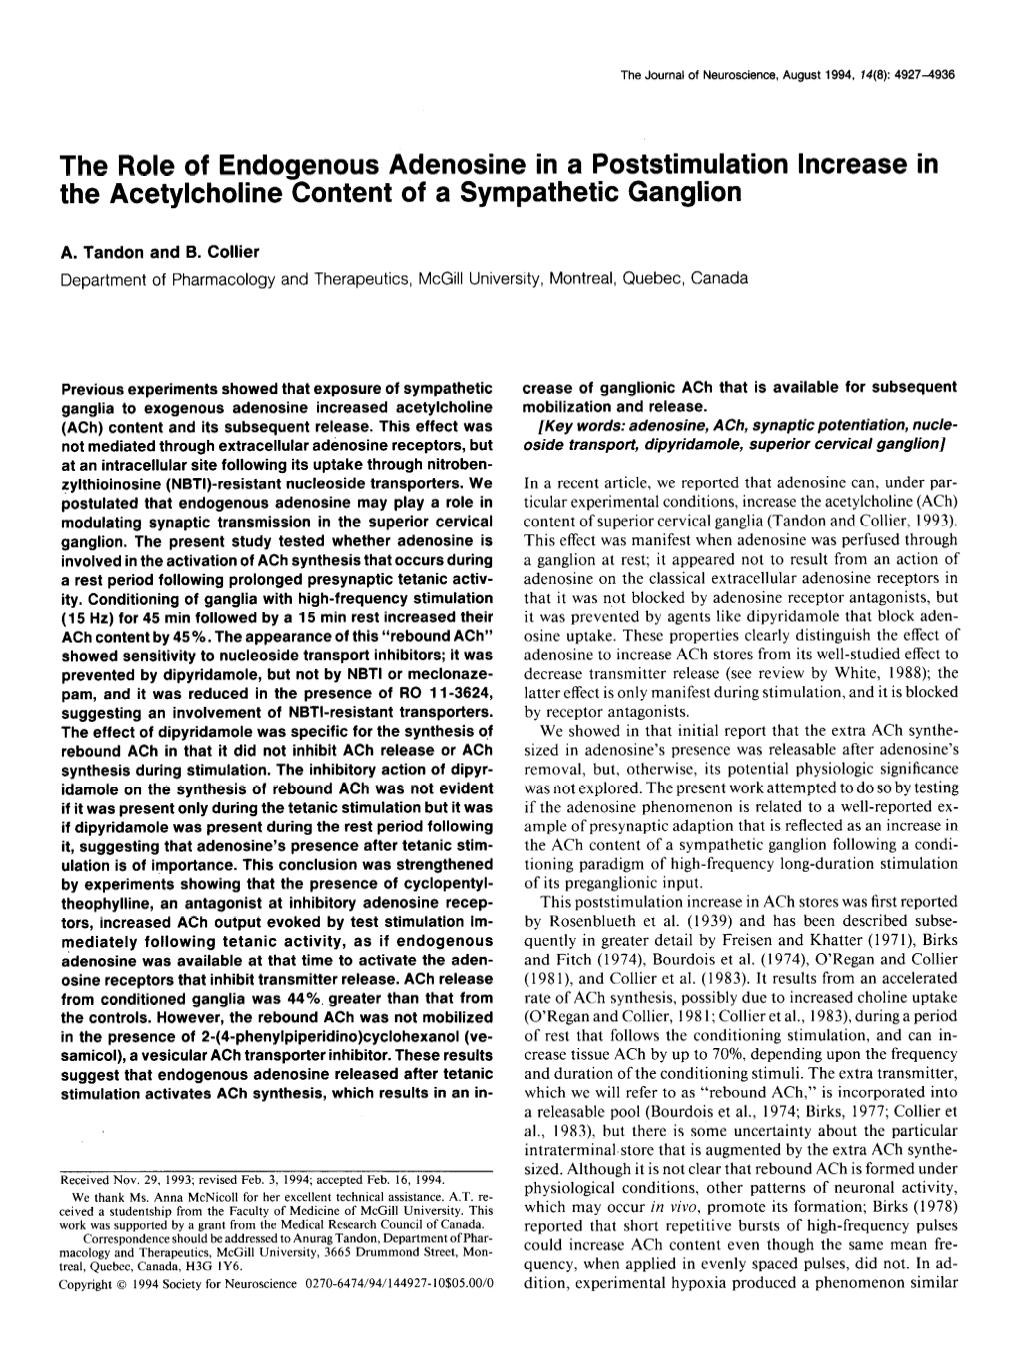 The Role of Endogenous Adenosine in a Poststimulation Increase in the Acetylcholine Content of a Sympathetic Ganglion